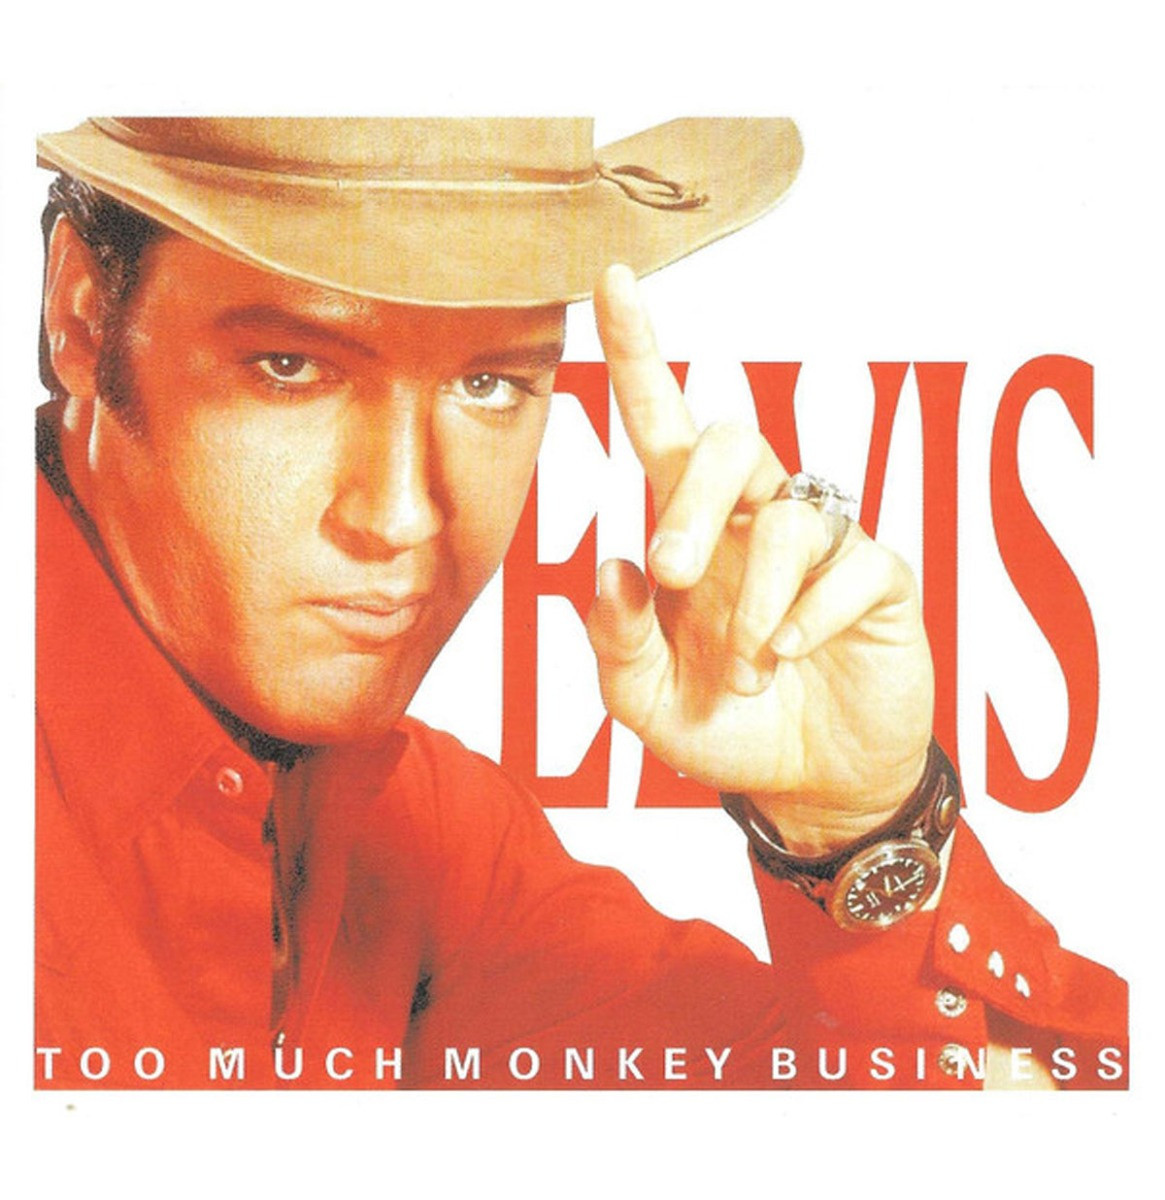 Elvis Presley: Too Much Monkey Business CD - FTD Label